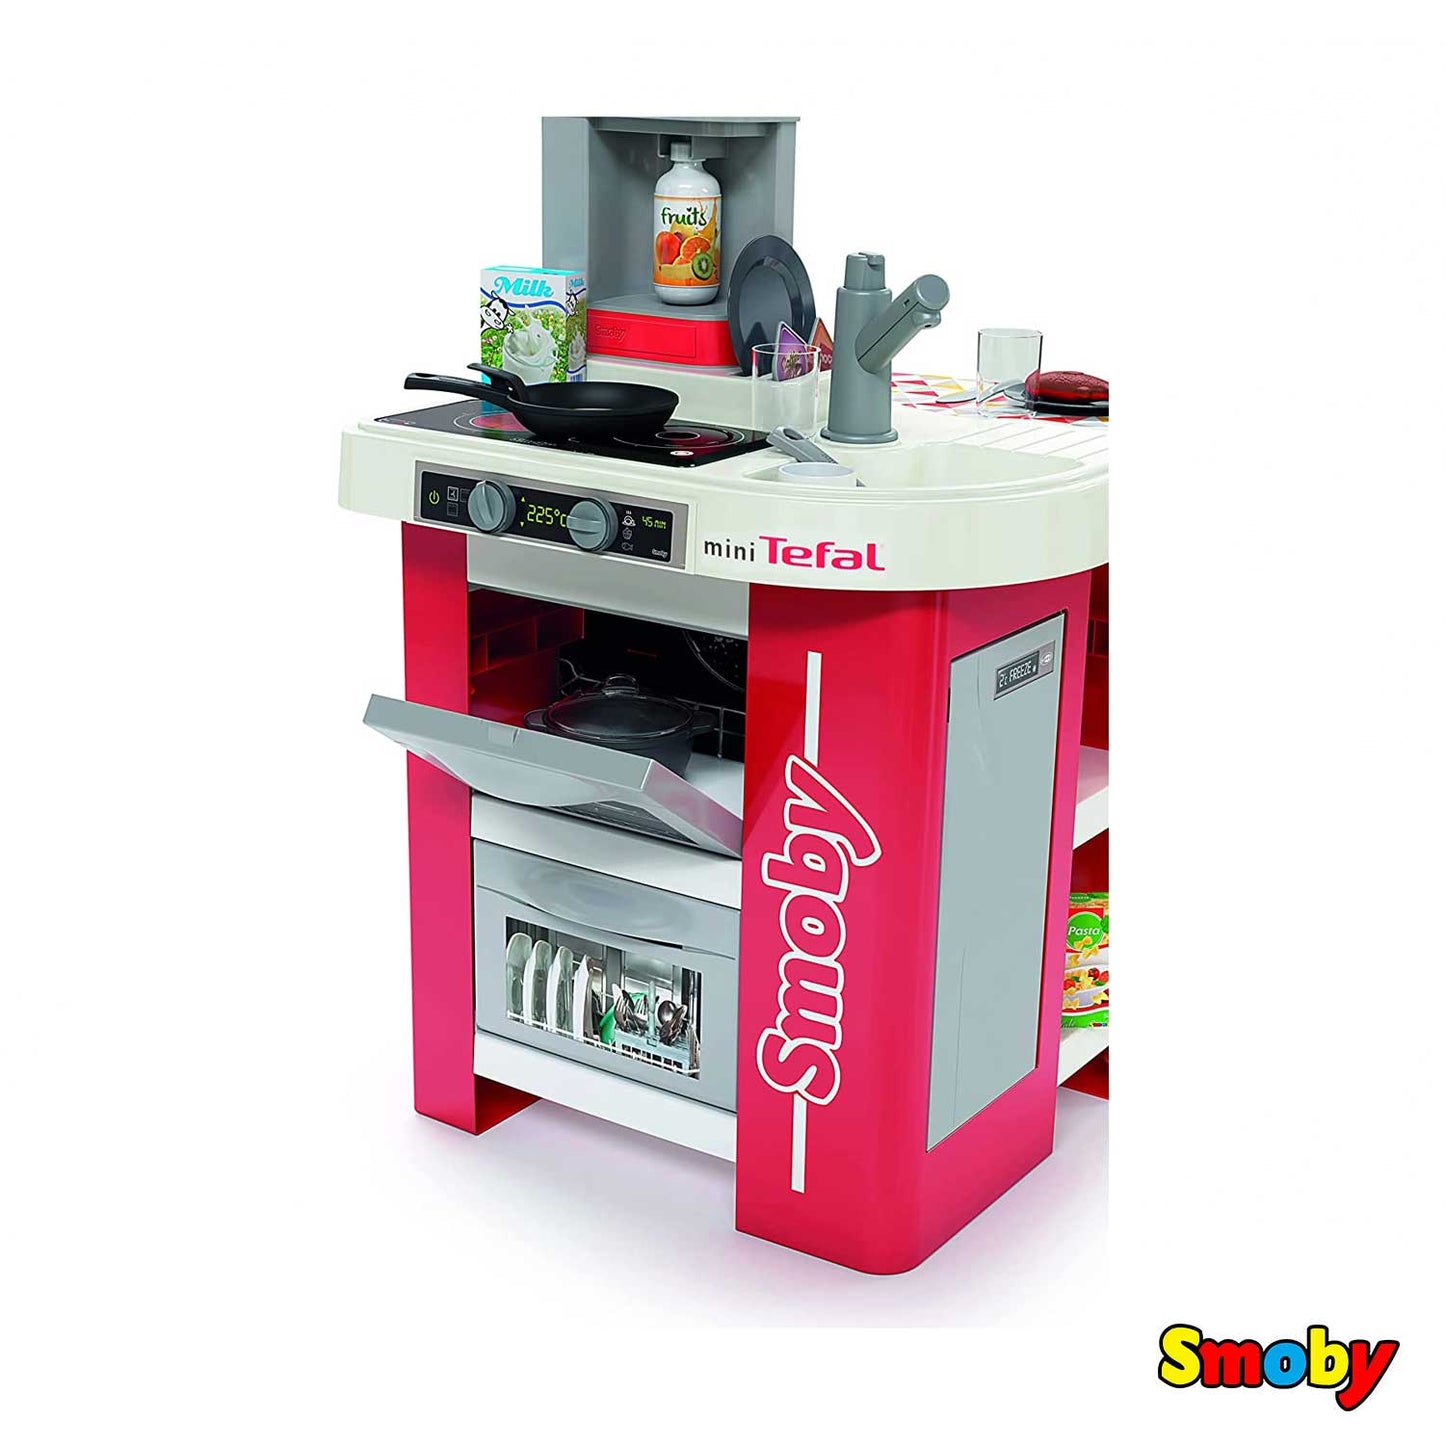 Smoby - Bubble Red Studio kitchen